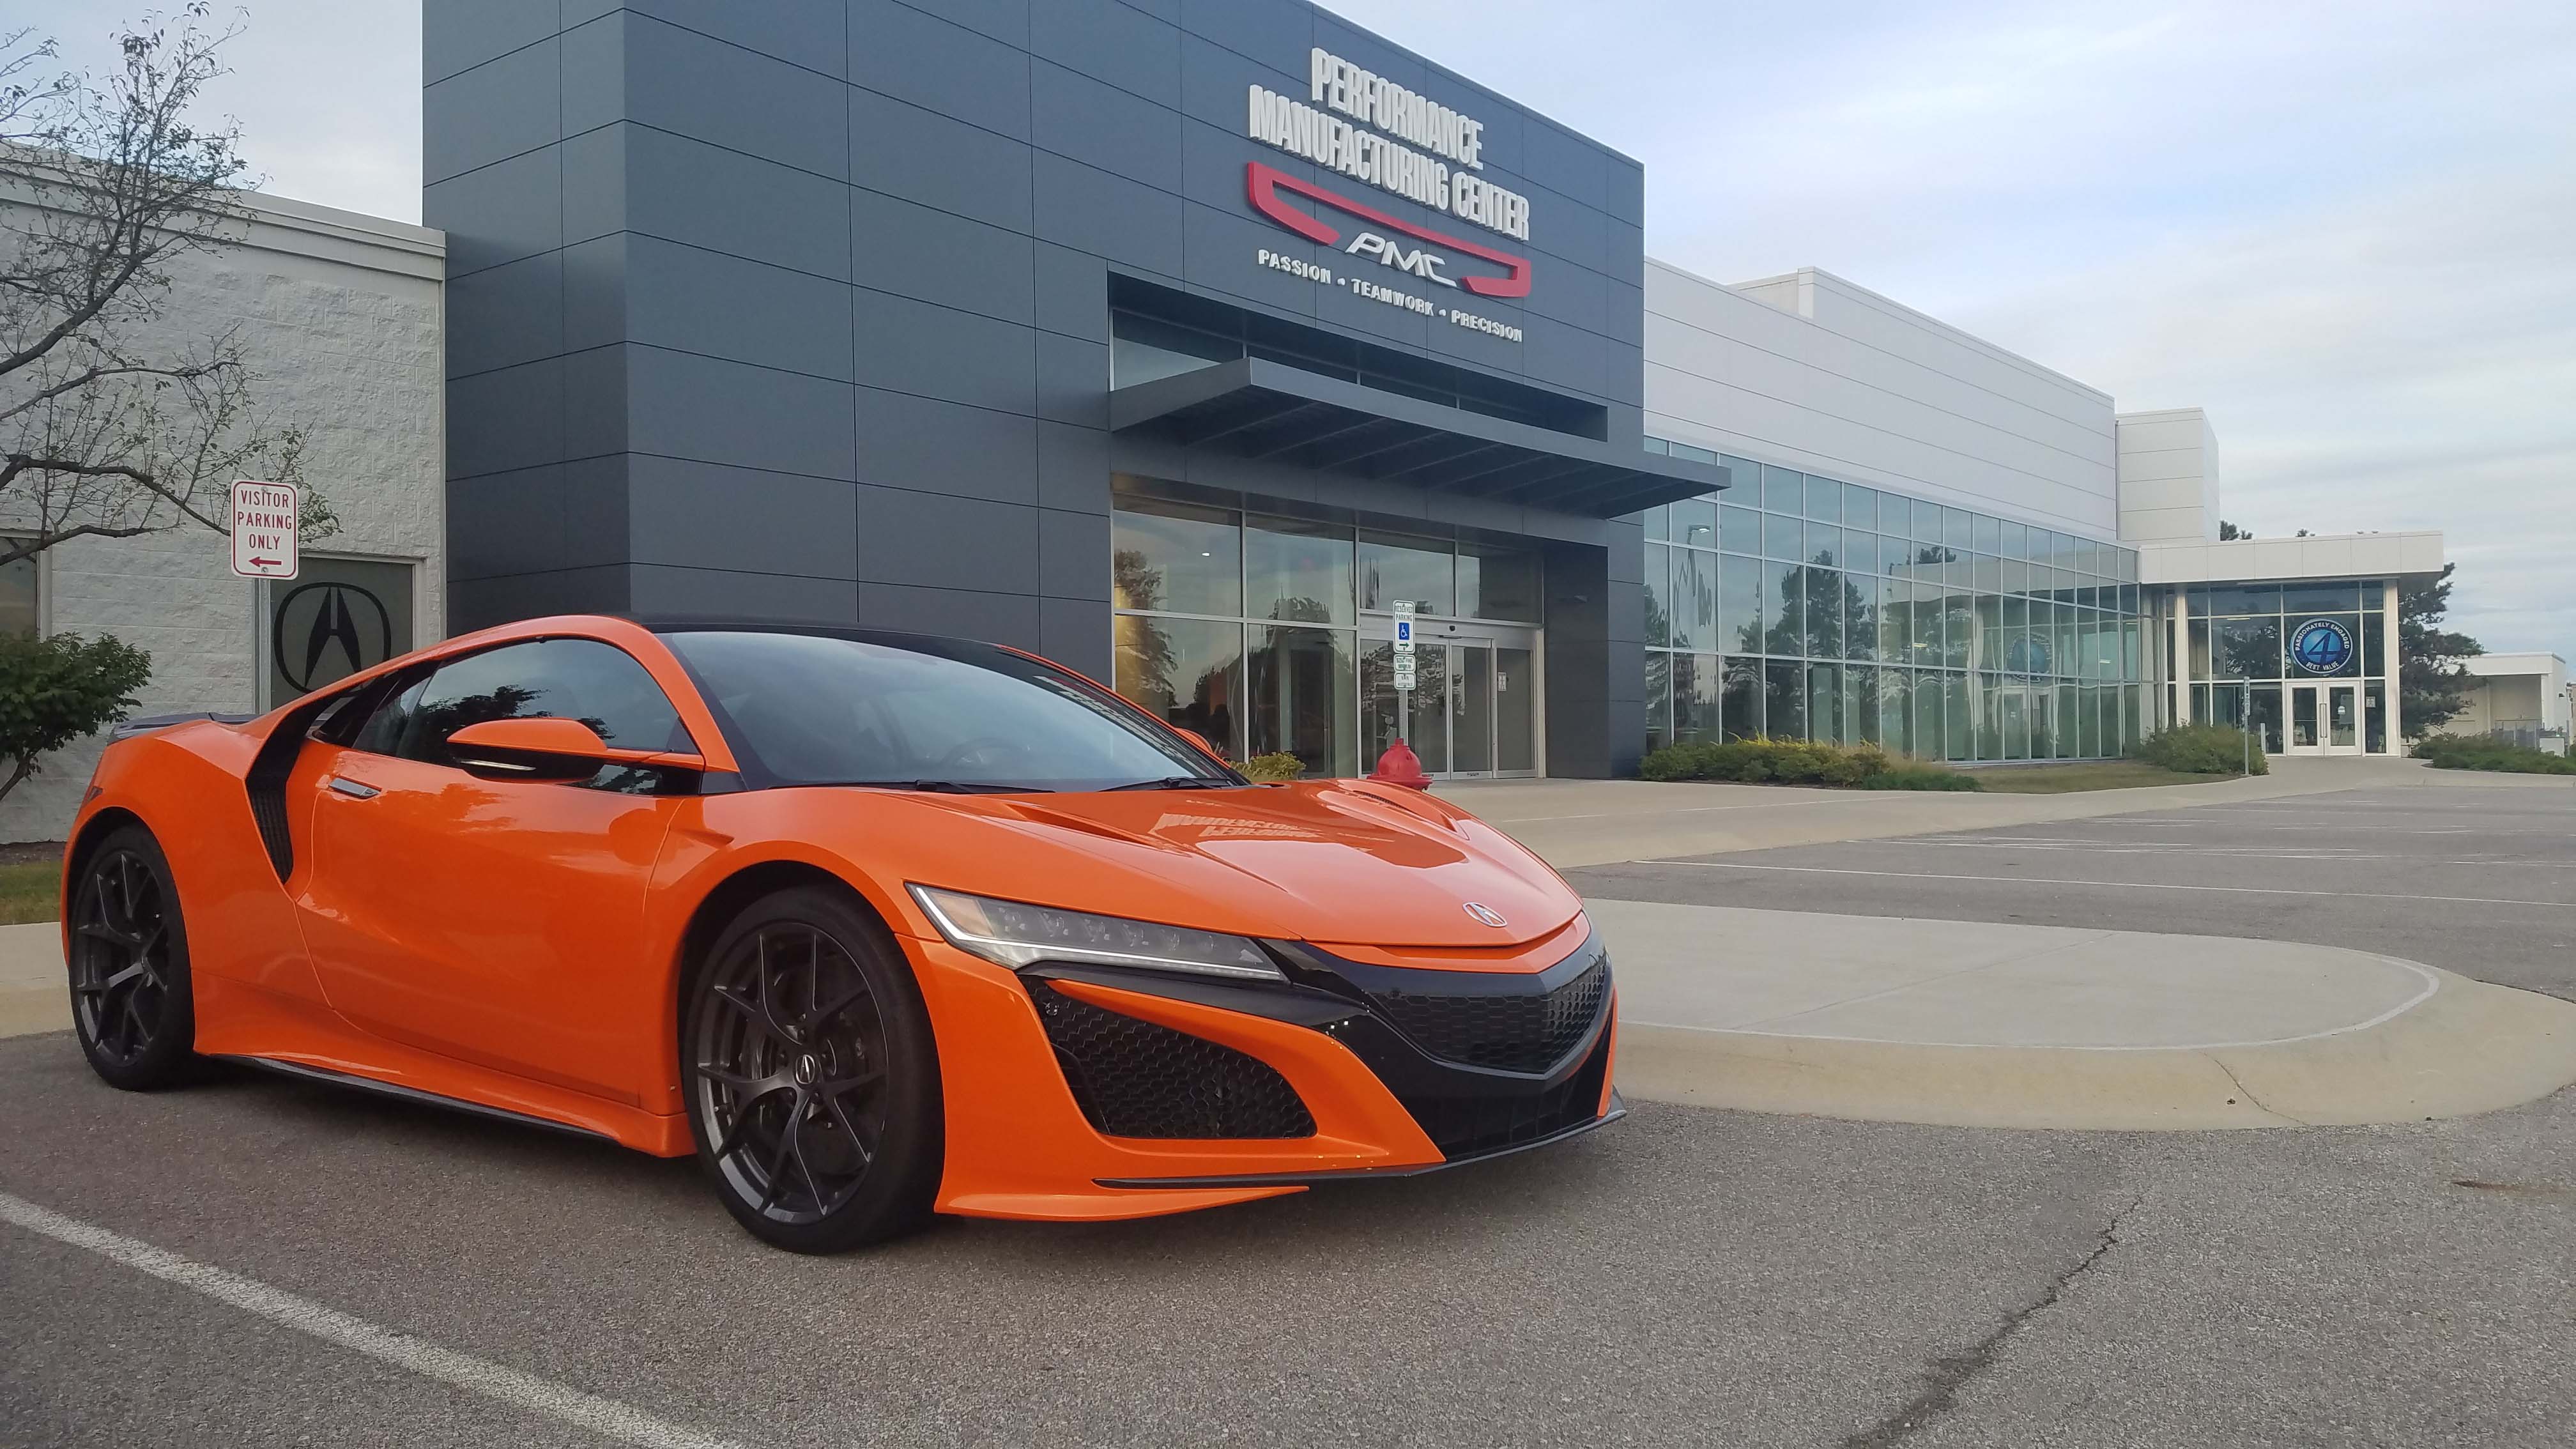 In addition to Honda Marysville Plant, Honda has a number of assembly plants across Ohio including  the Honda Performance Center in Marysville that produces Acura's $160k supercar, the NSX.